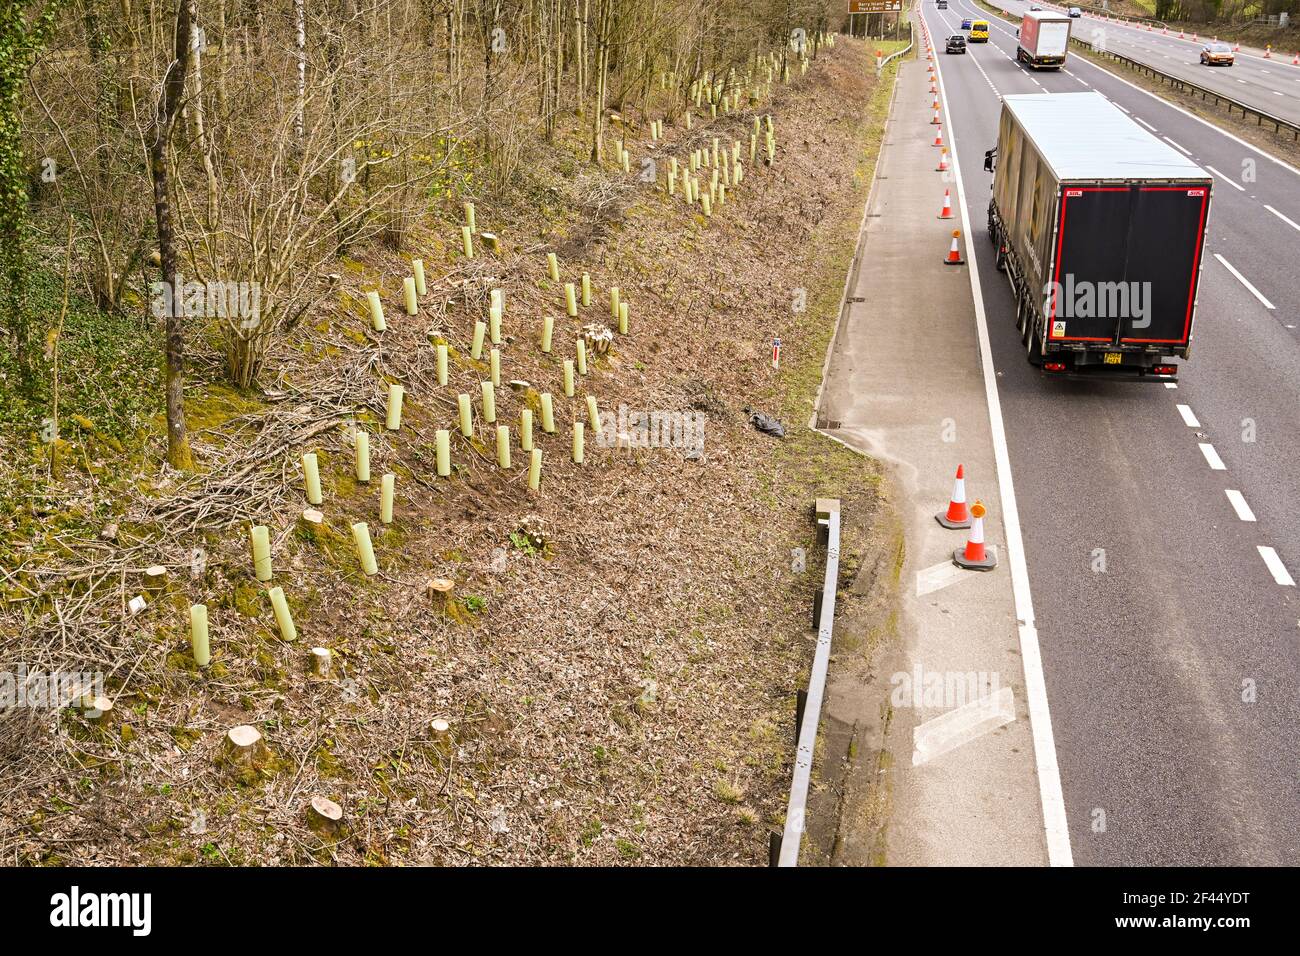 Miskin, near Cardiff, Wales - March 2021: New trees being planted in protective plastic sleeves on the banking alongside the M4 motorway. Stock Photo